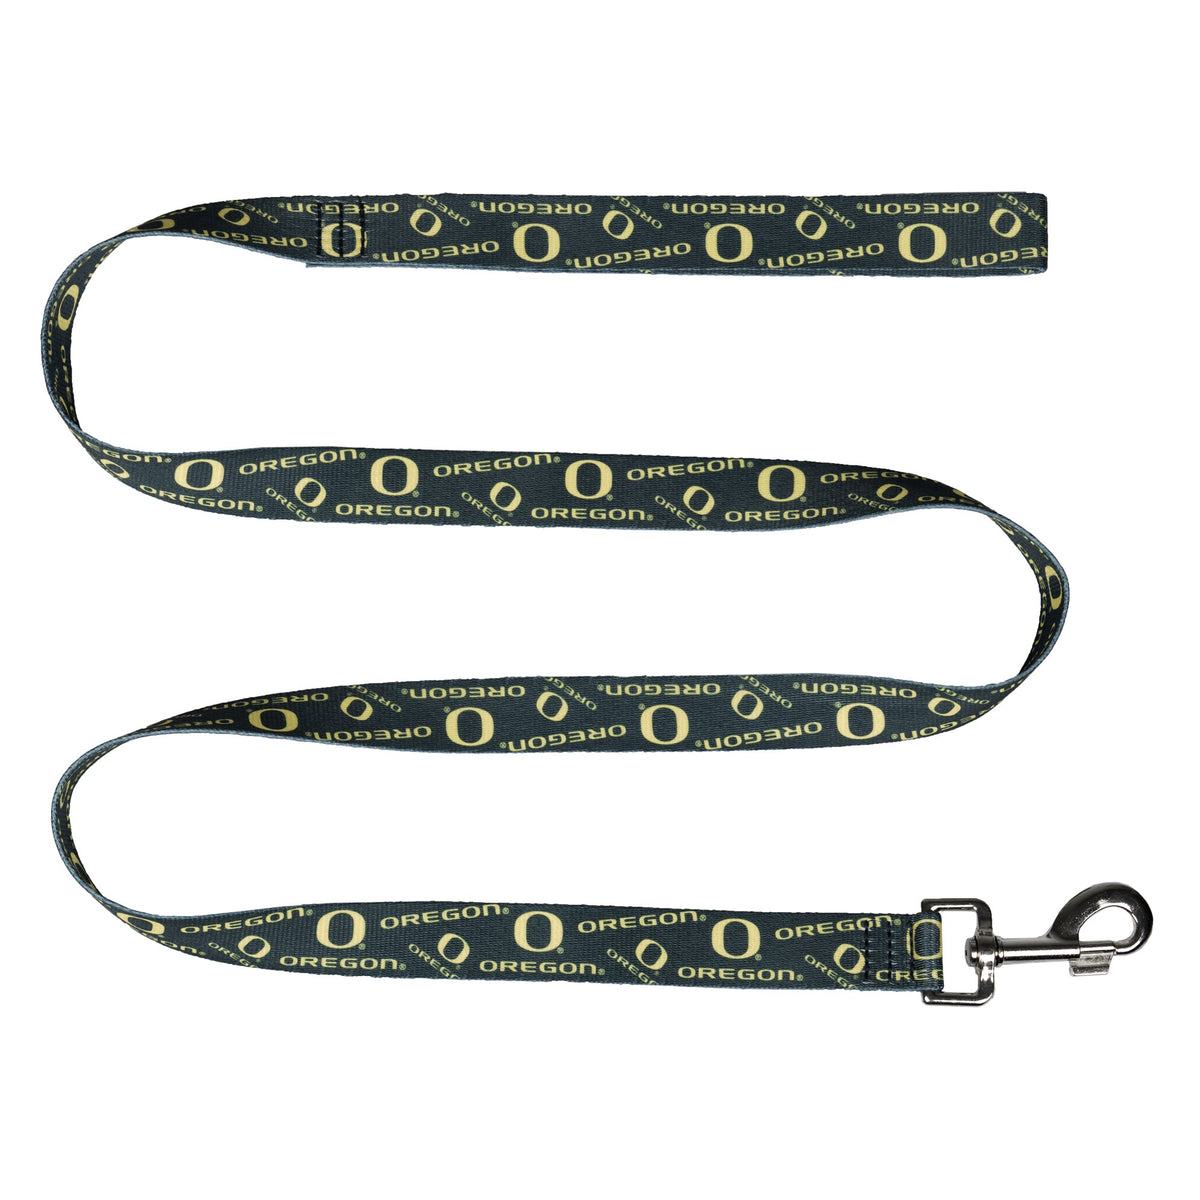 OR Ducks Ltd Dog Collar or Leash - 3 Red Rovers